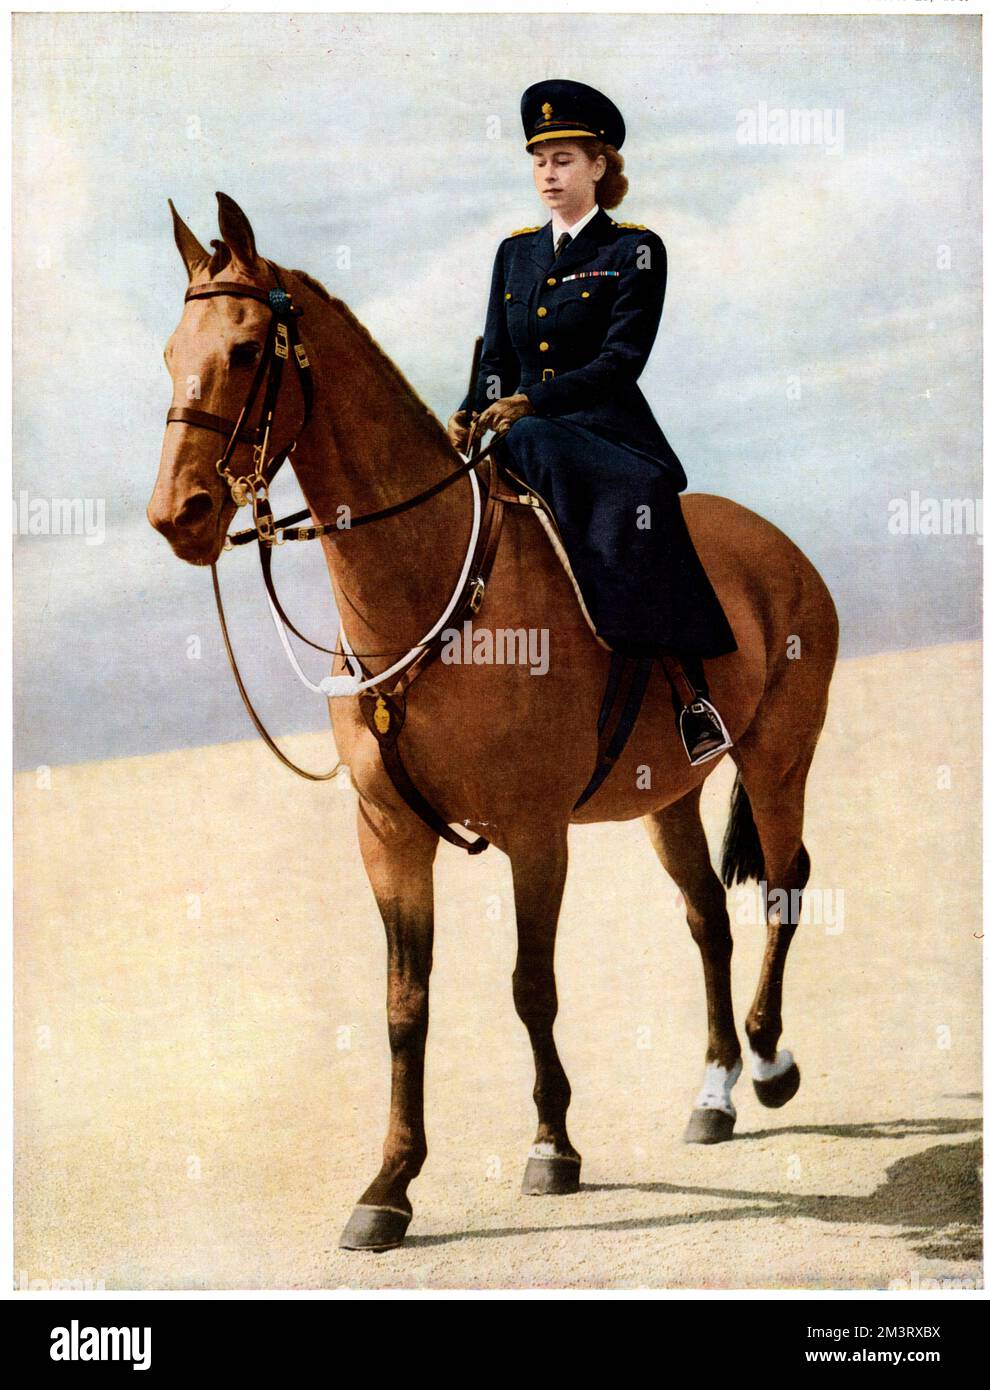 Queen Elizabeth II, then Princess Elizabeth, in a specially designed uniform as Colonel of the Grenadier Guards on horseback at the Trooping of the Colour ceremony in June 1947, the first time it had taken place in seven years.  She wore a specially designed habit and dark blue jacket with brass button, and  peaked cap bearing the badge of her regiment.       Date: 1947 Stock Photo